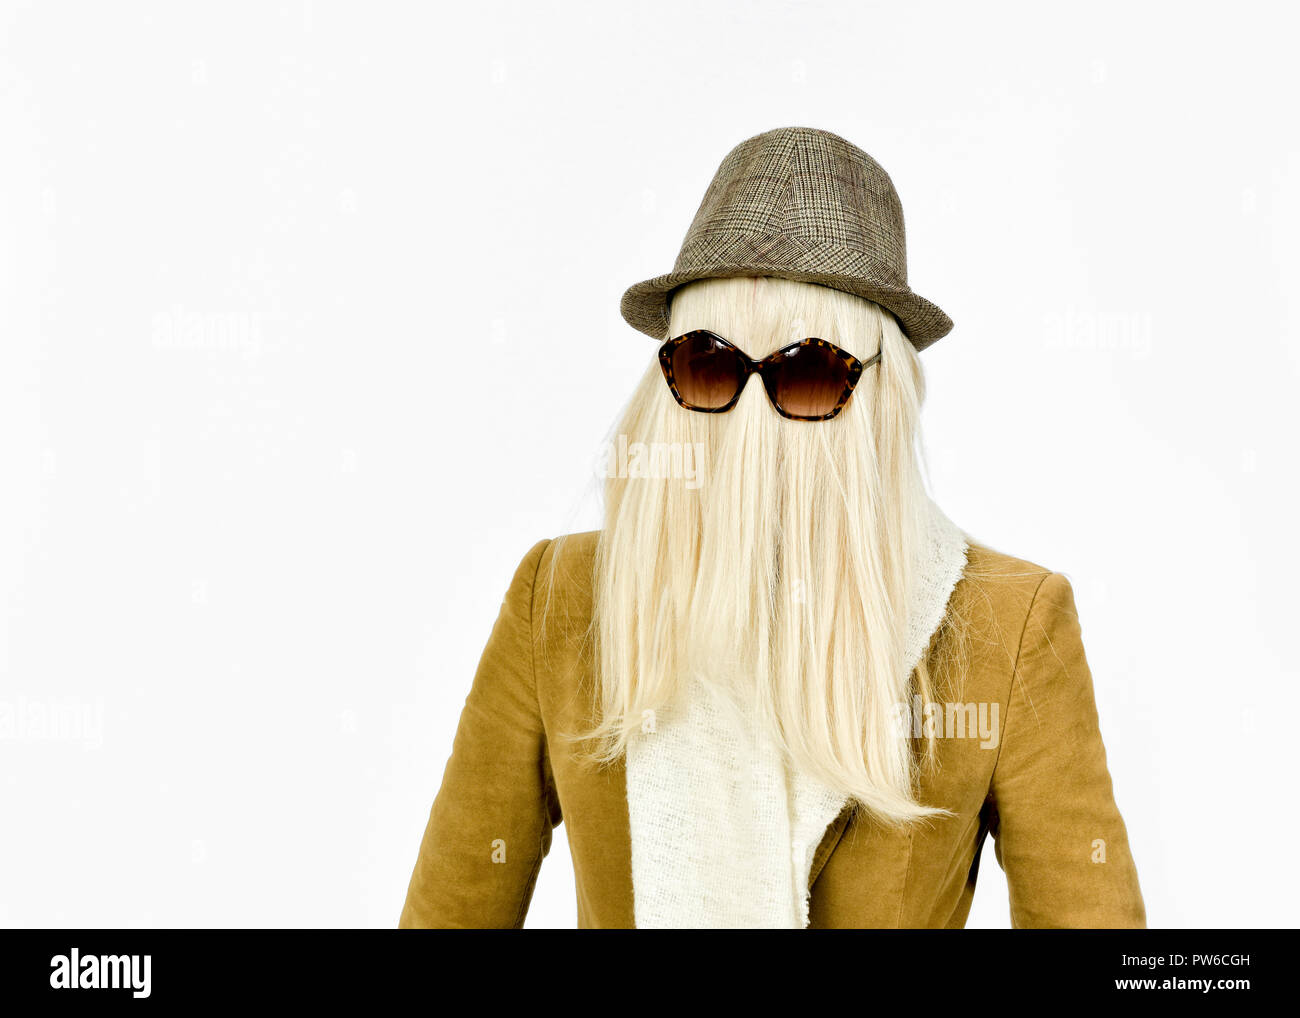 Fun image of woman with long blonde hair covering face and sun glasses playing dress up for Halloween as Cousin Itt Stock Photo